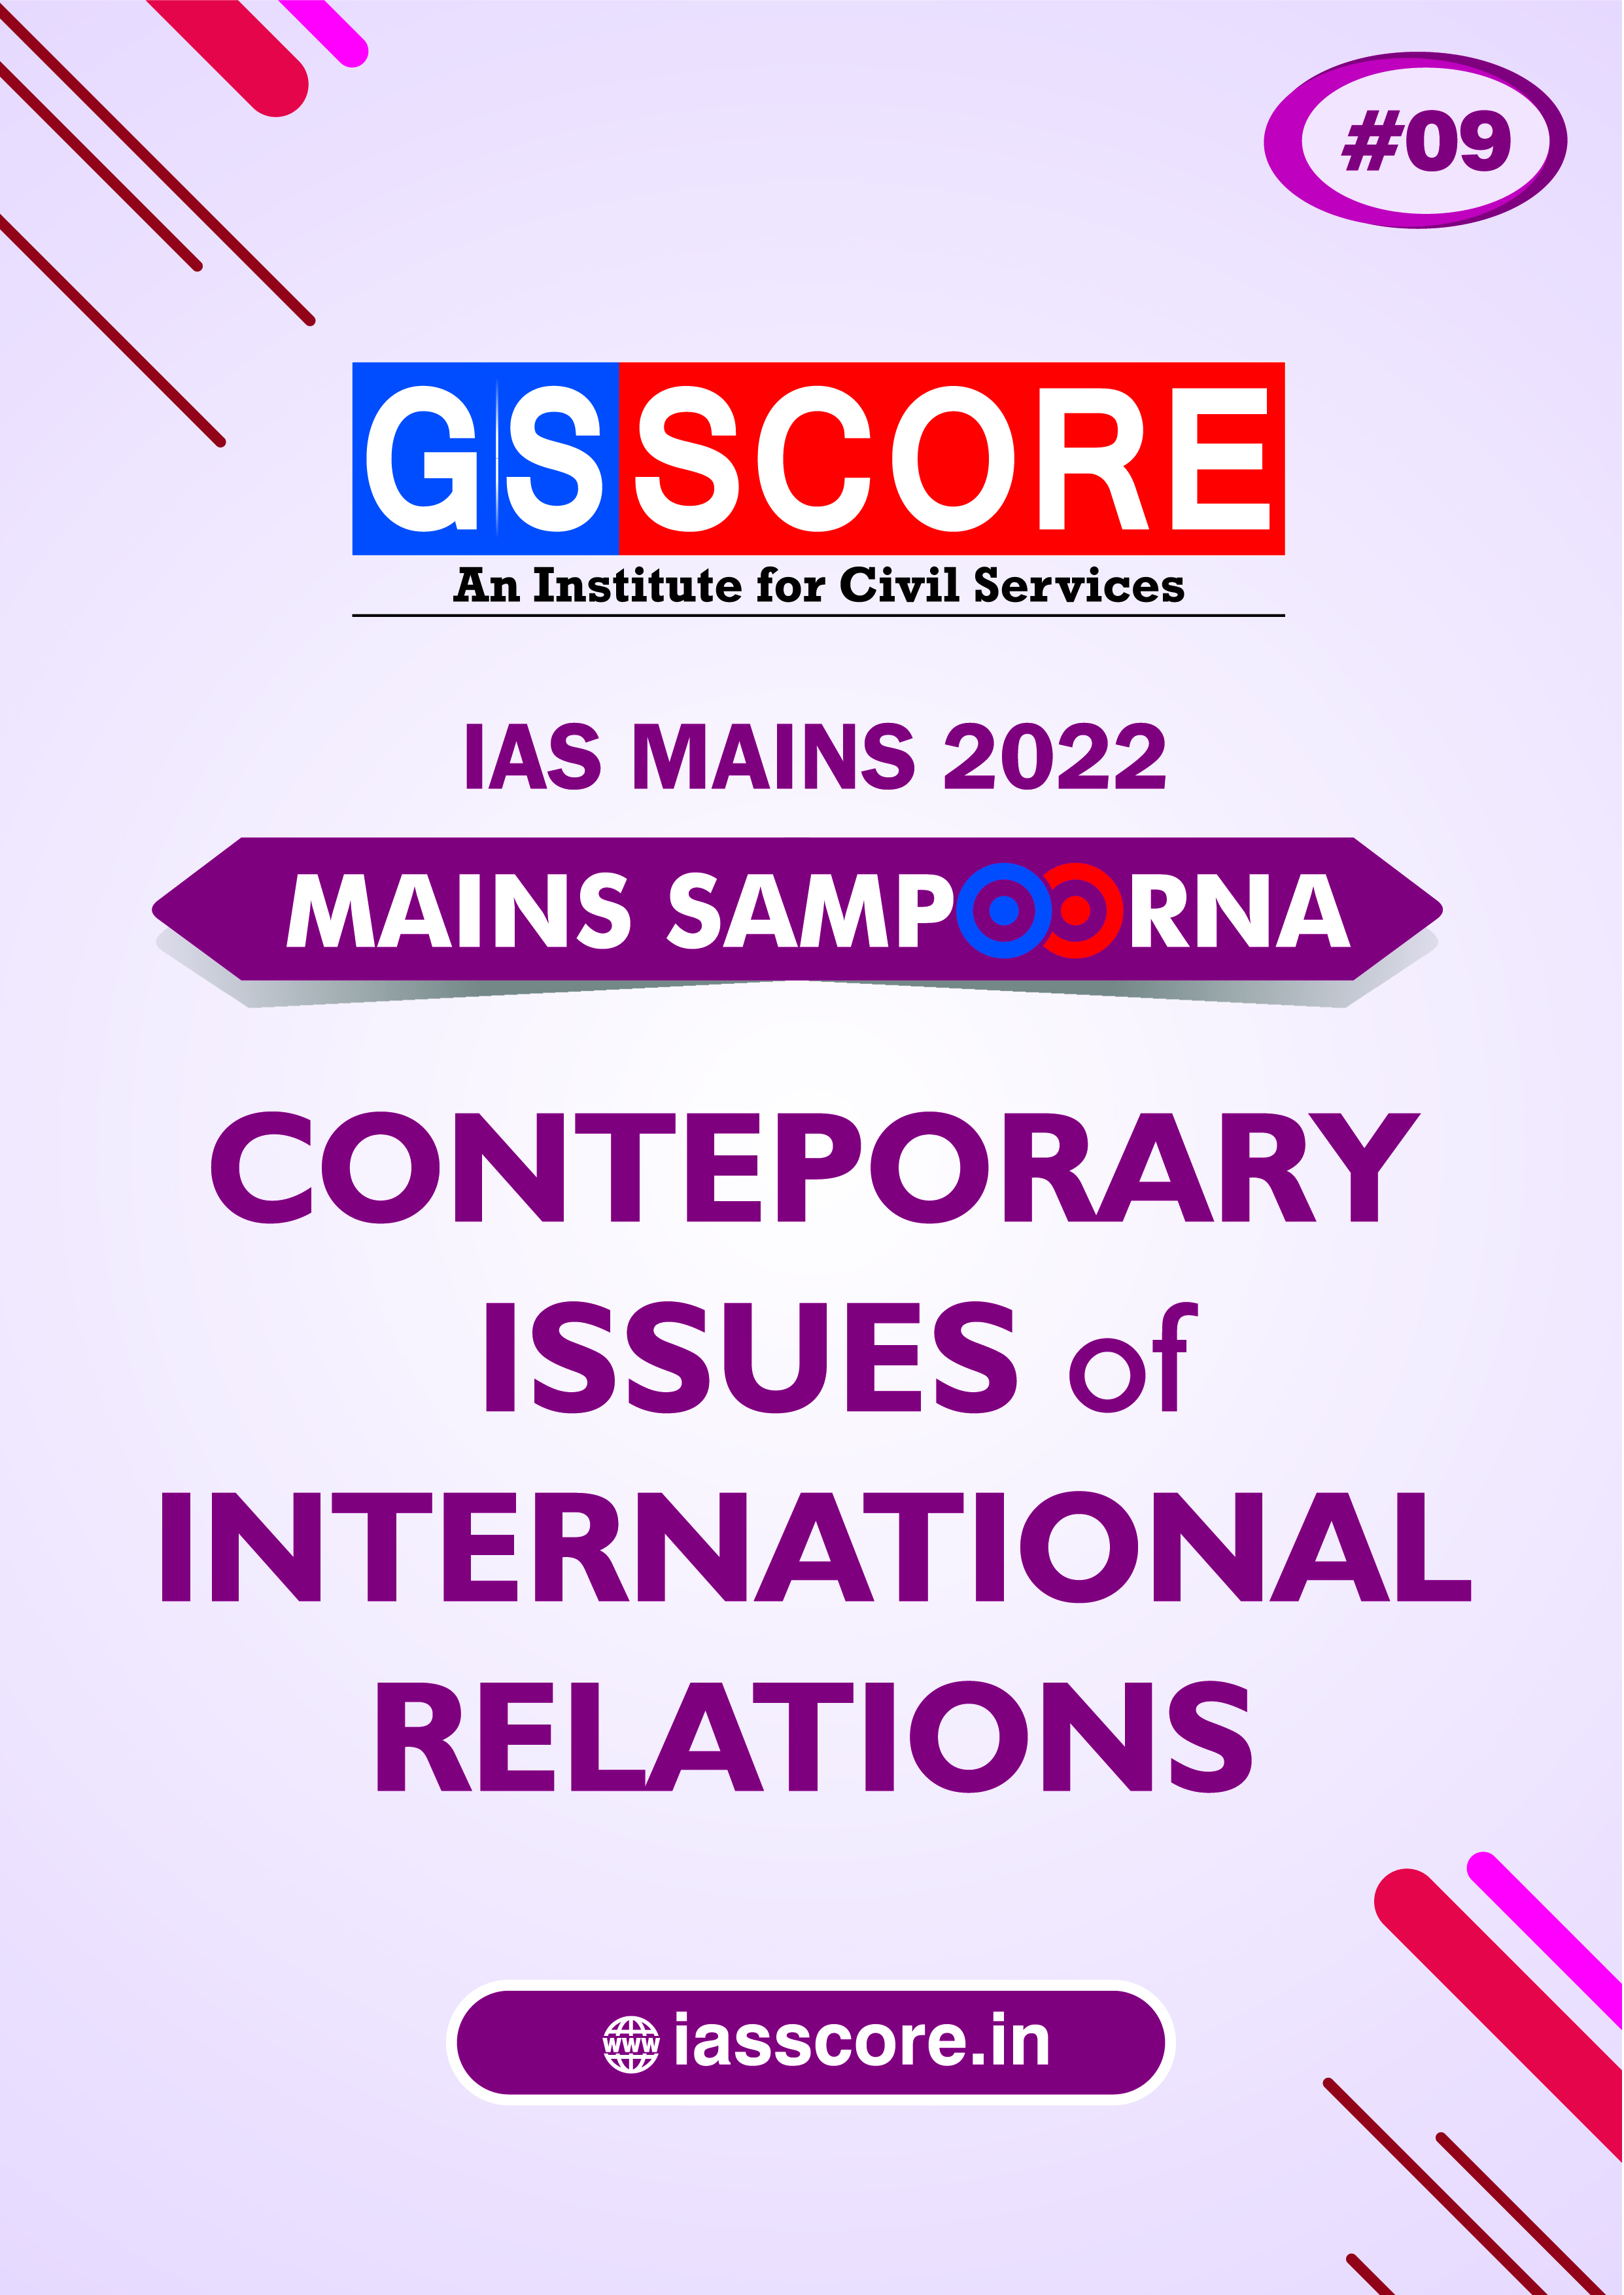 Mains Sampoorna: Contemporary Issues of International Relations